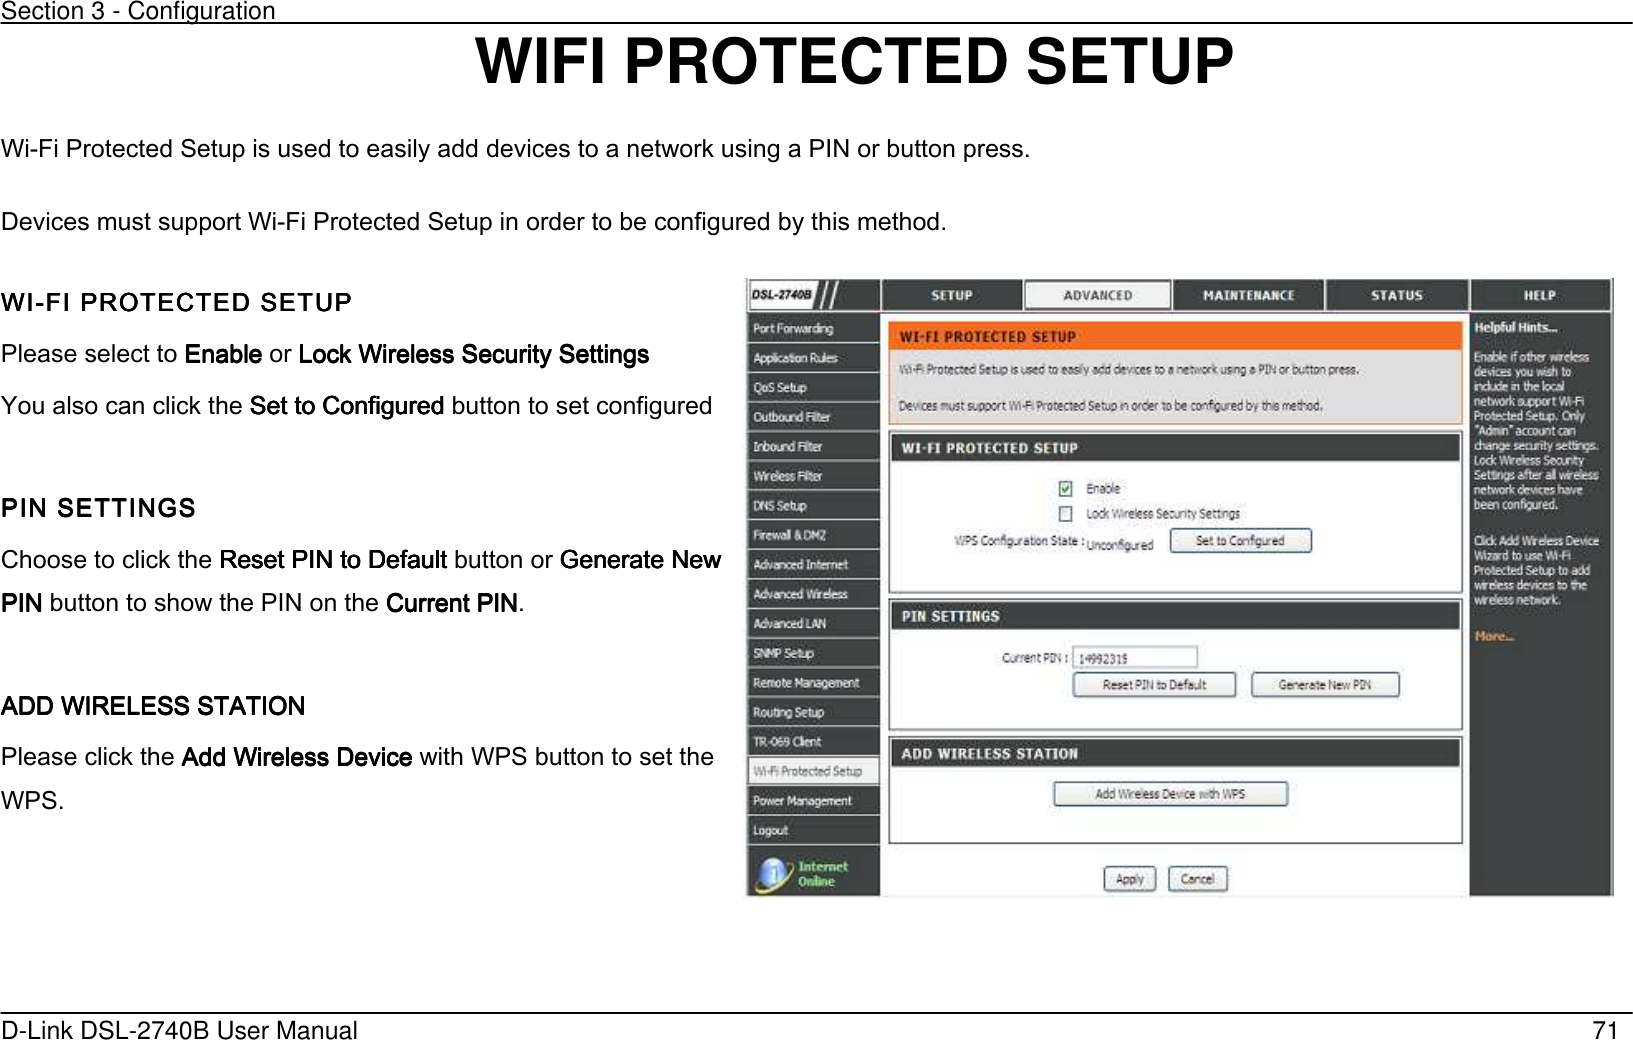 Section 3 - Configuration   D-Link DSL-2740B User Manual                                                  71 WIFI PROTECTED SETUP Wi-Fi Protected Setup is used to easily add devices to a network using a PIN or button press. Devices must support Wi-Fi Protected Setup in order to be configured by this method. WIWIWIWI----FI PROTECTED SETUFI PROTECTED SETUFI PROTECTED SETUFI PROTECTED SETUPPPP    Please select to EnableEnableEnableEnable or Lock Wireless Security Settings Lock Wireless Security Settings Lock Wireless Security Settings Lock Wireless Security Settings         You also can click the Set to ConfiguredSet to ConfiguredSet to ConfiguredSet to Configured button to set configured  PIN SETTINGSPIN SETTINGSPIN SETTINGSPIN SETTINGS     Choose to click the Reset Reset Reset Reset PIN to DefaultPIN to DefaultPIN to DefaultPIN to Default button or Generate New Generate New Generate New Generate New PIN PIN PIN PIN button to show the PIN on the Current PINCurrent PINCurrent PINCurrent PIN.  ADD WIRELESS STATION ADD WIRELESS STATION ADD WIRELESS STATION ADD WIRELESS STATION      Please click the Add Wireless DeviceAdd Wireless DeviceAdd Wireless DeviceAdd Wireless Device with WPS button to set the WPS.  